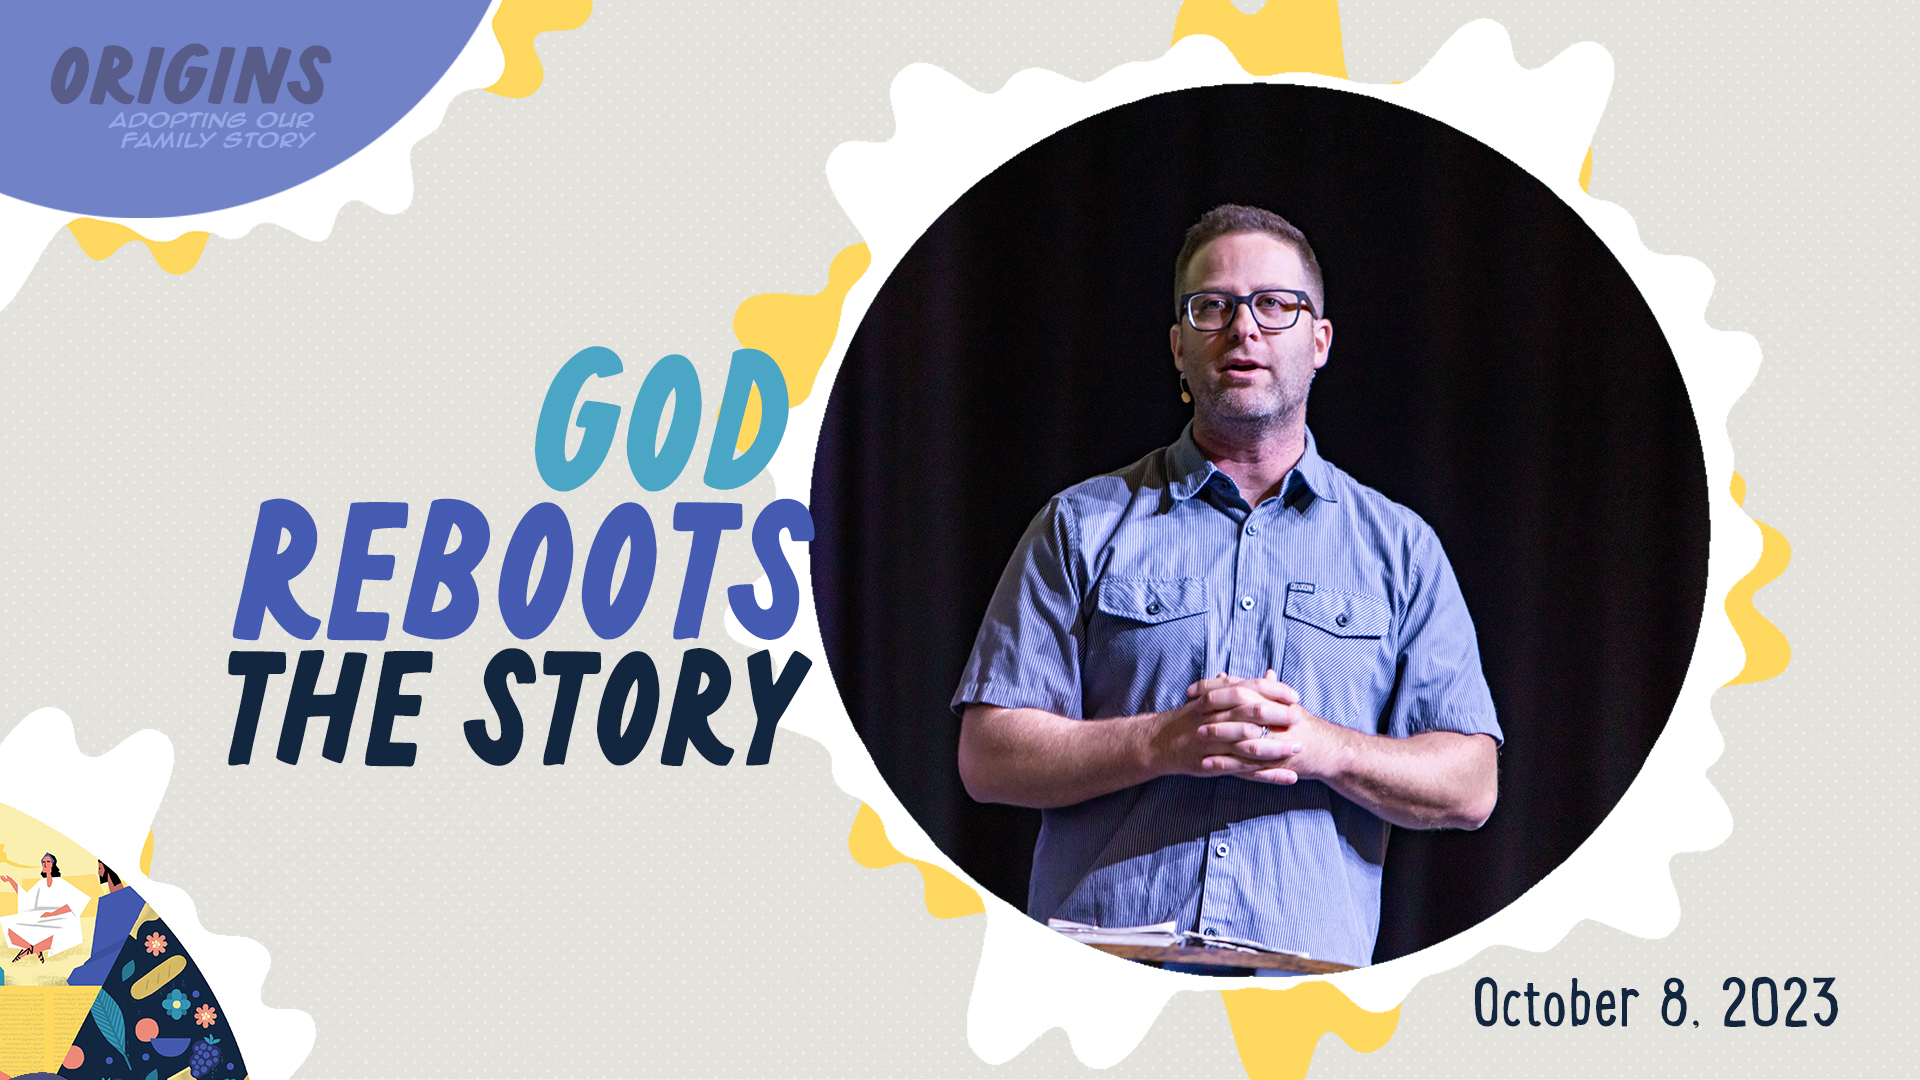 God Reboots the Story Image